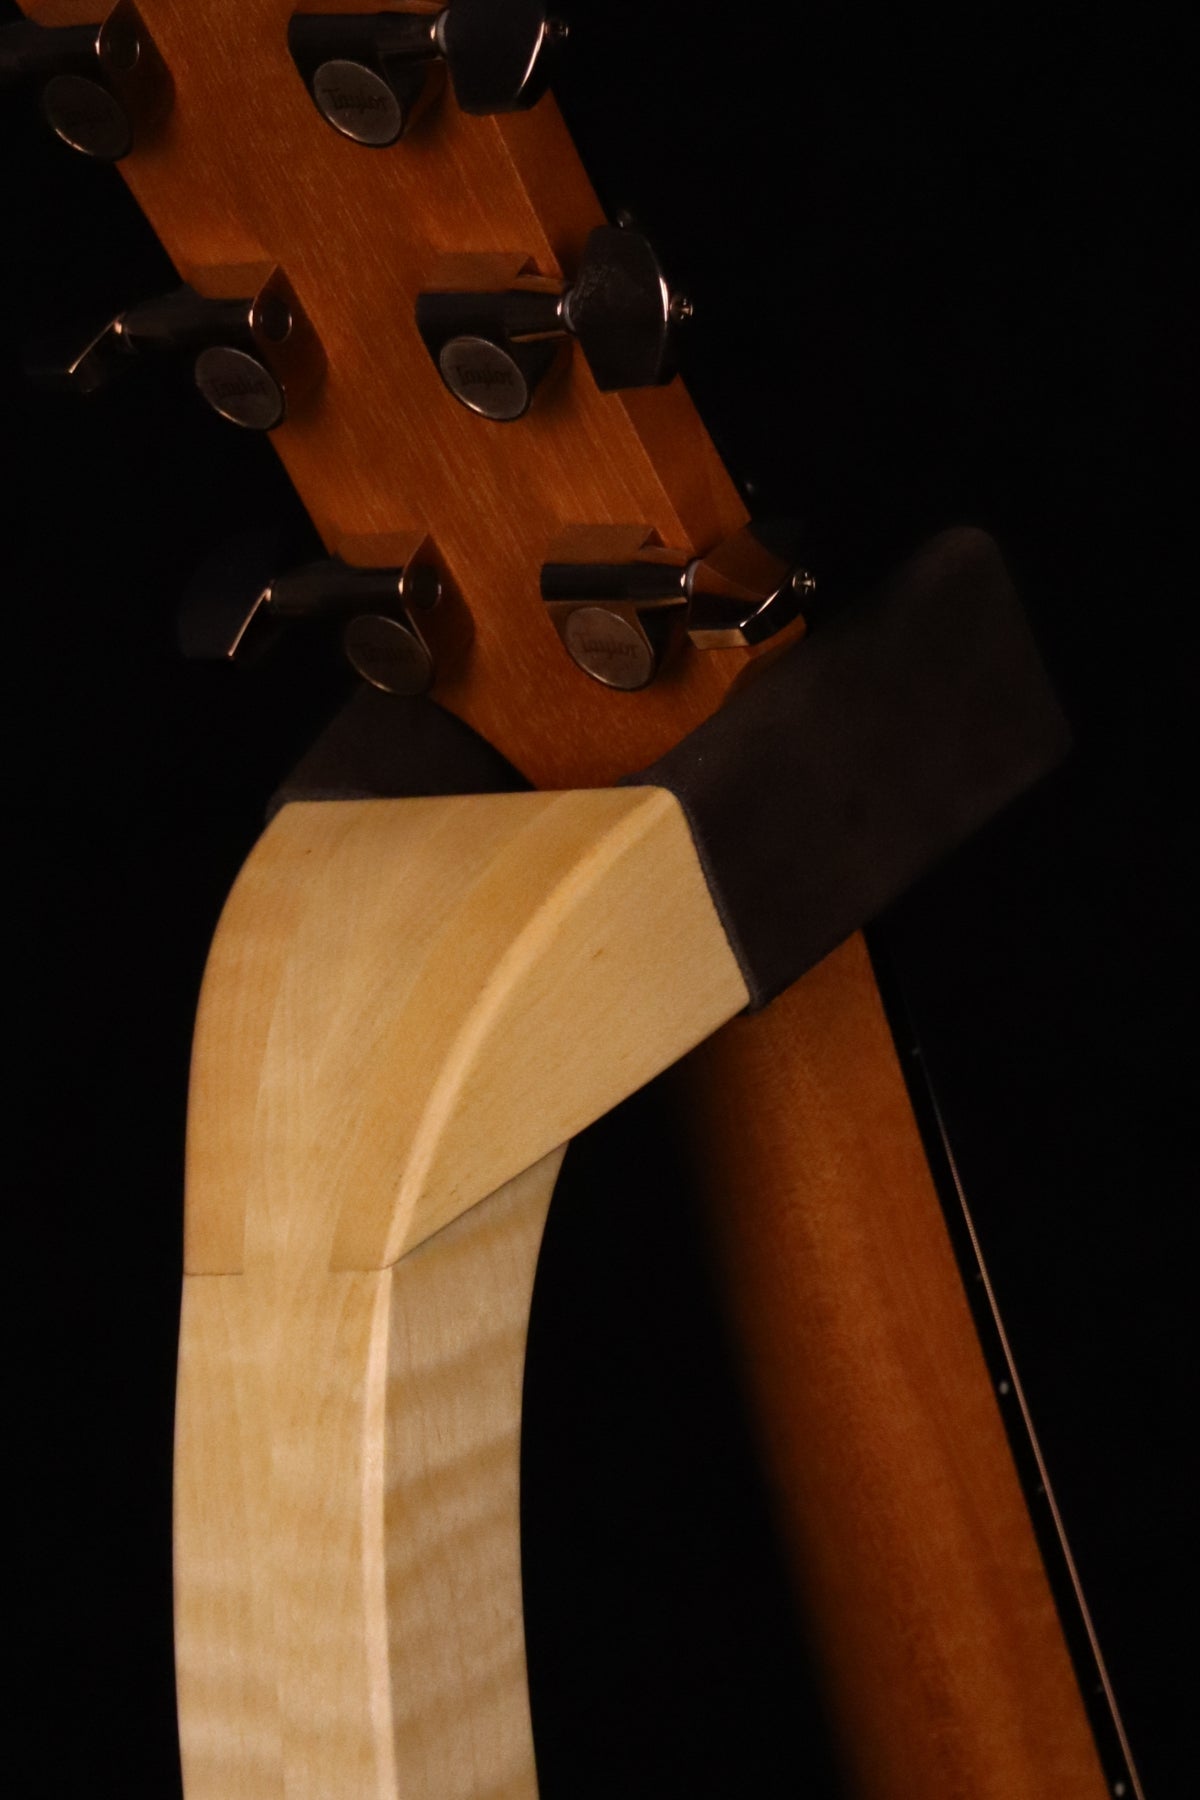 Folding curly maple wood guitar floor stand yoke detail image with Taylor guitar